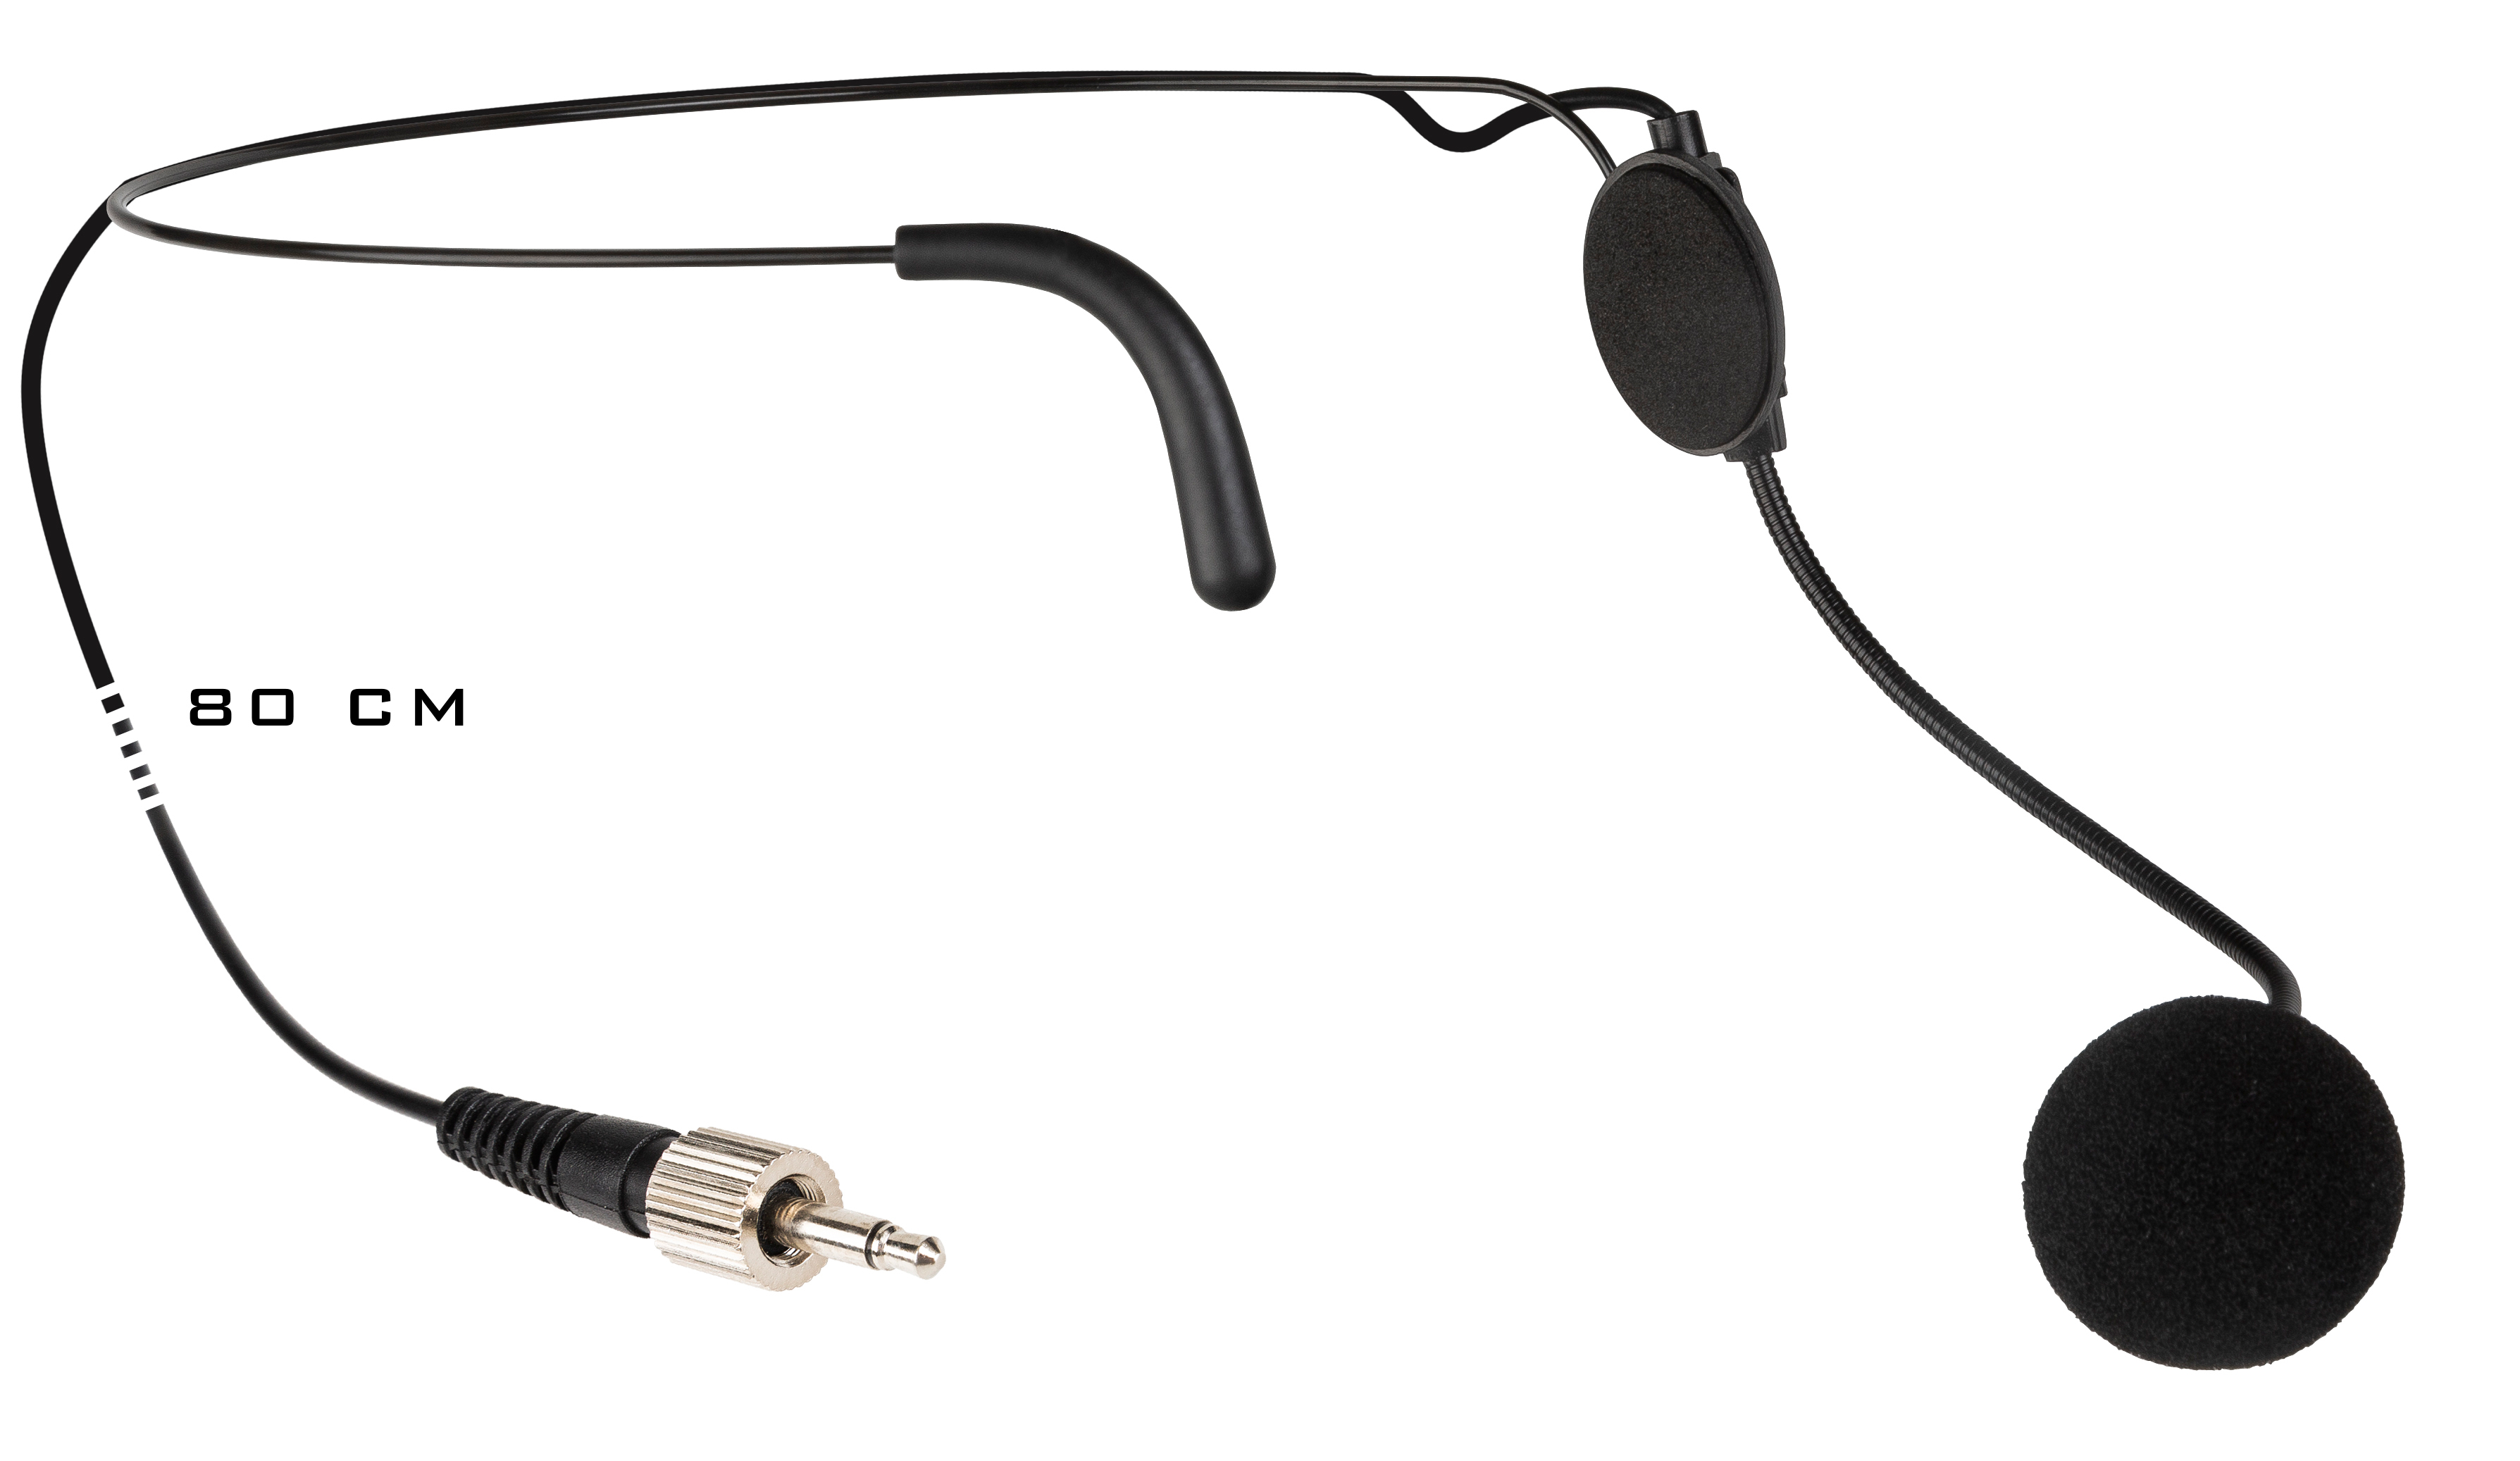 Lightweight headset condenser microphone with lockable mini-jack for use with the HF-BPACK